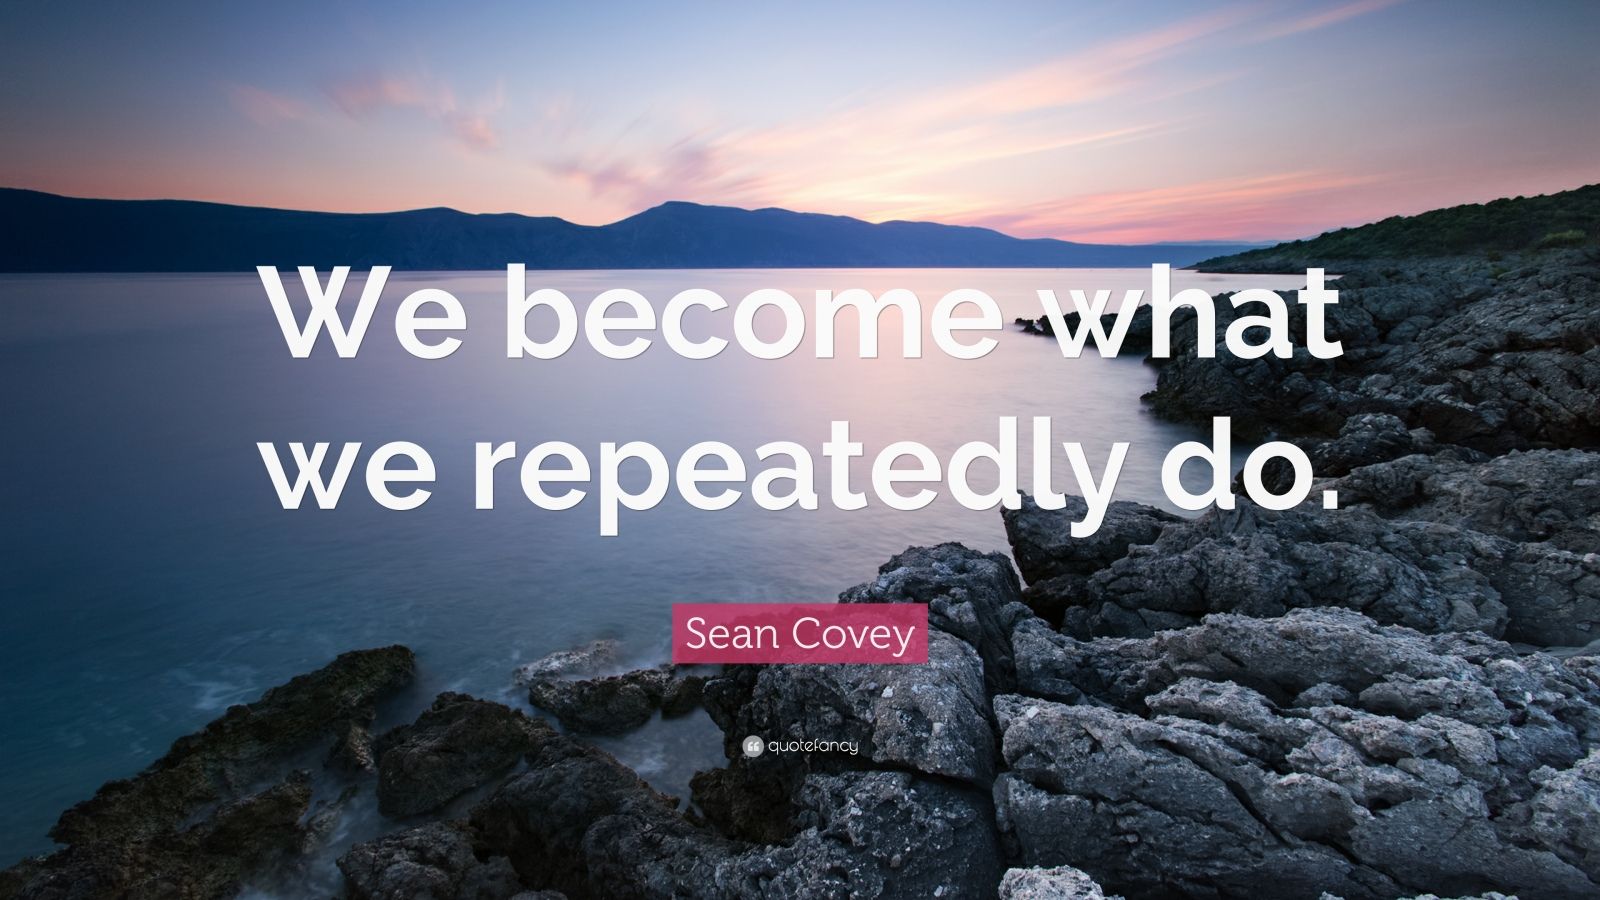 habit quotes: "we become what we repeatedly do."— sean covey